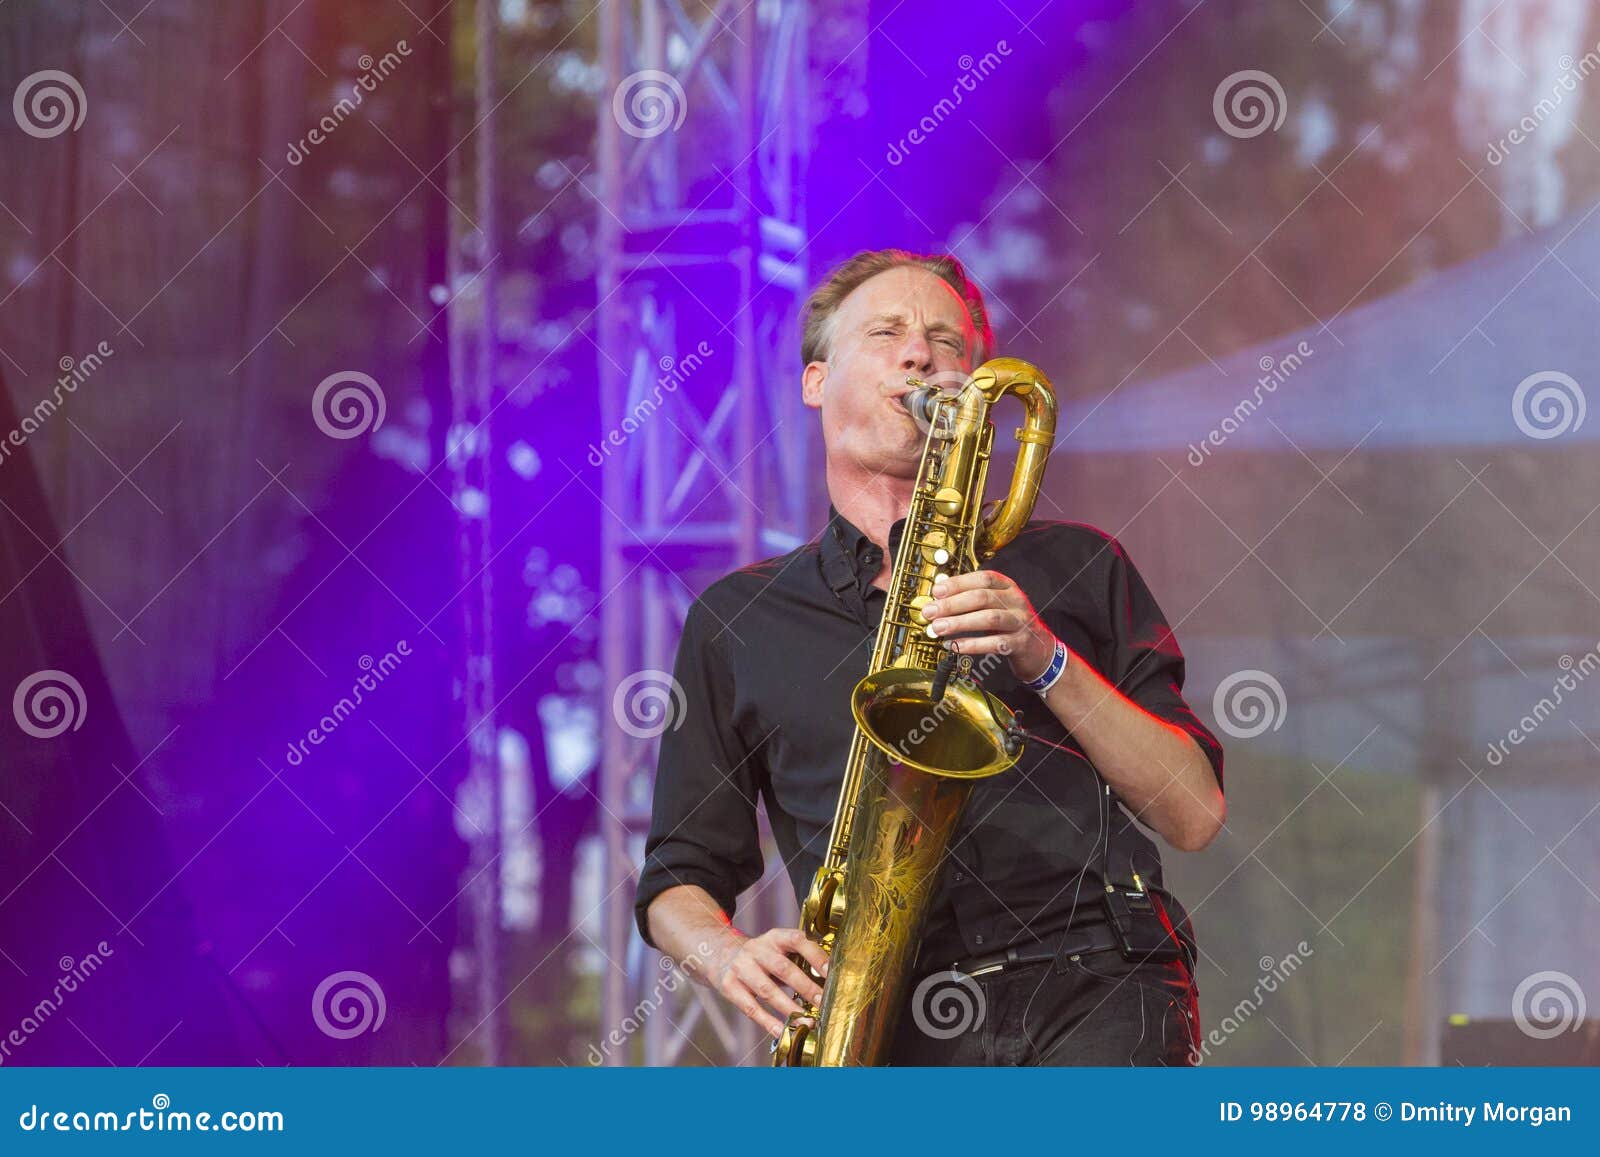 Saxofonist Stock Photos Free & Royalty-Free Stock Photos from Dreamstime